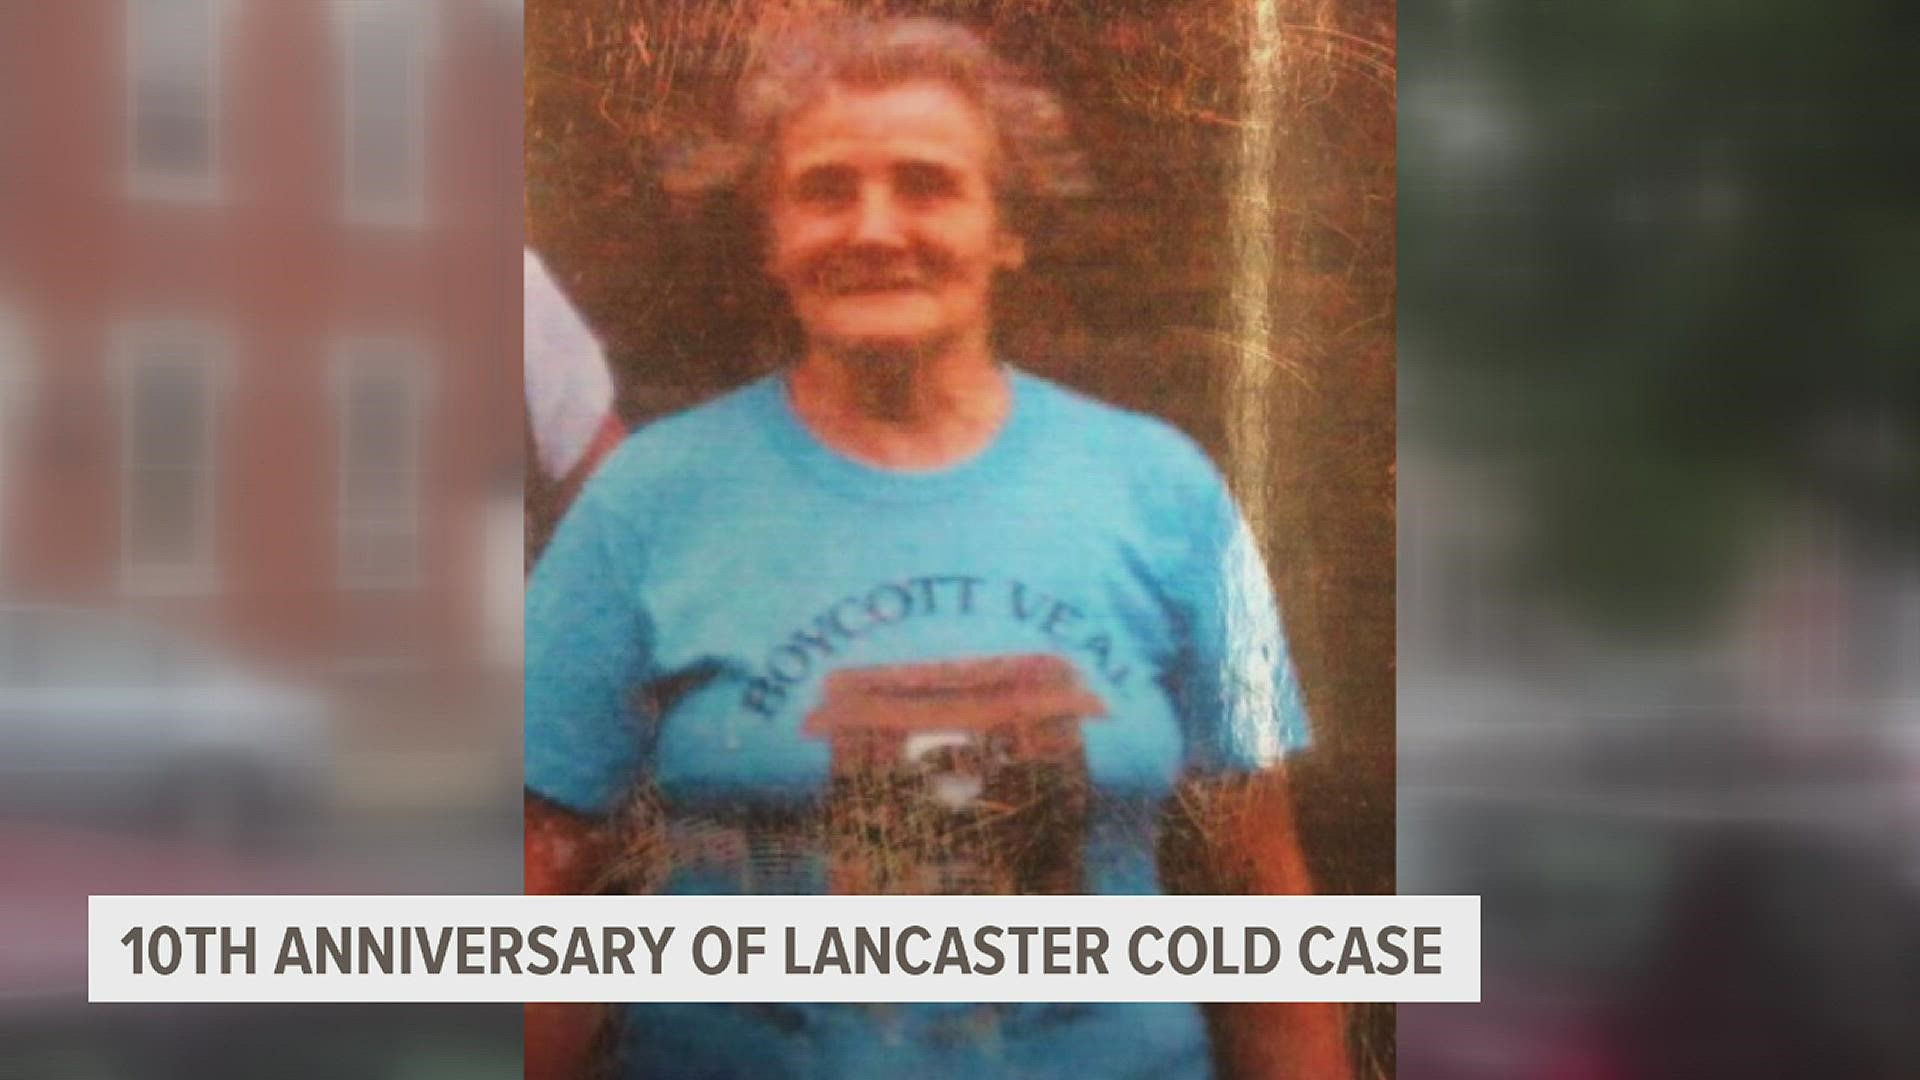 Lancaster Police are hoping to use the anniversary to motivate residents to find Kaylor's killer.